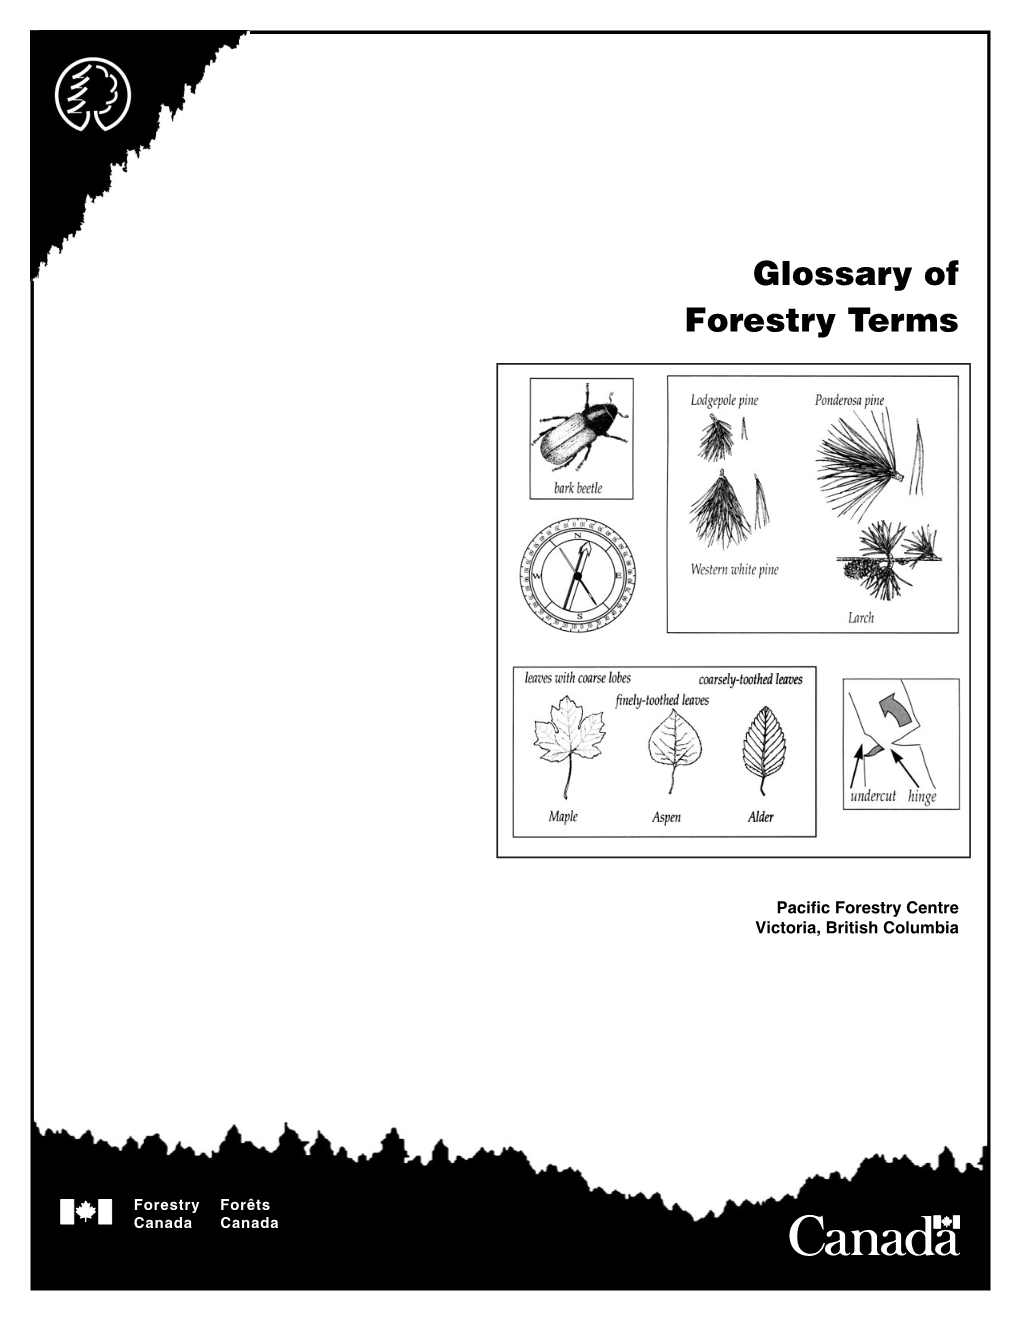 Glossary of Forestry Terms